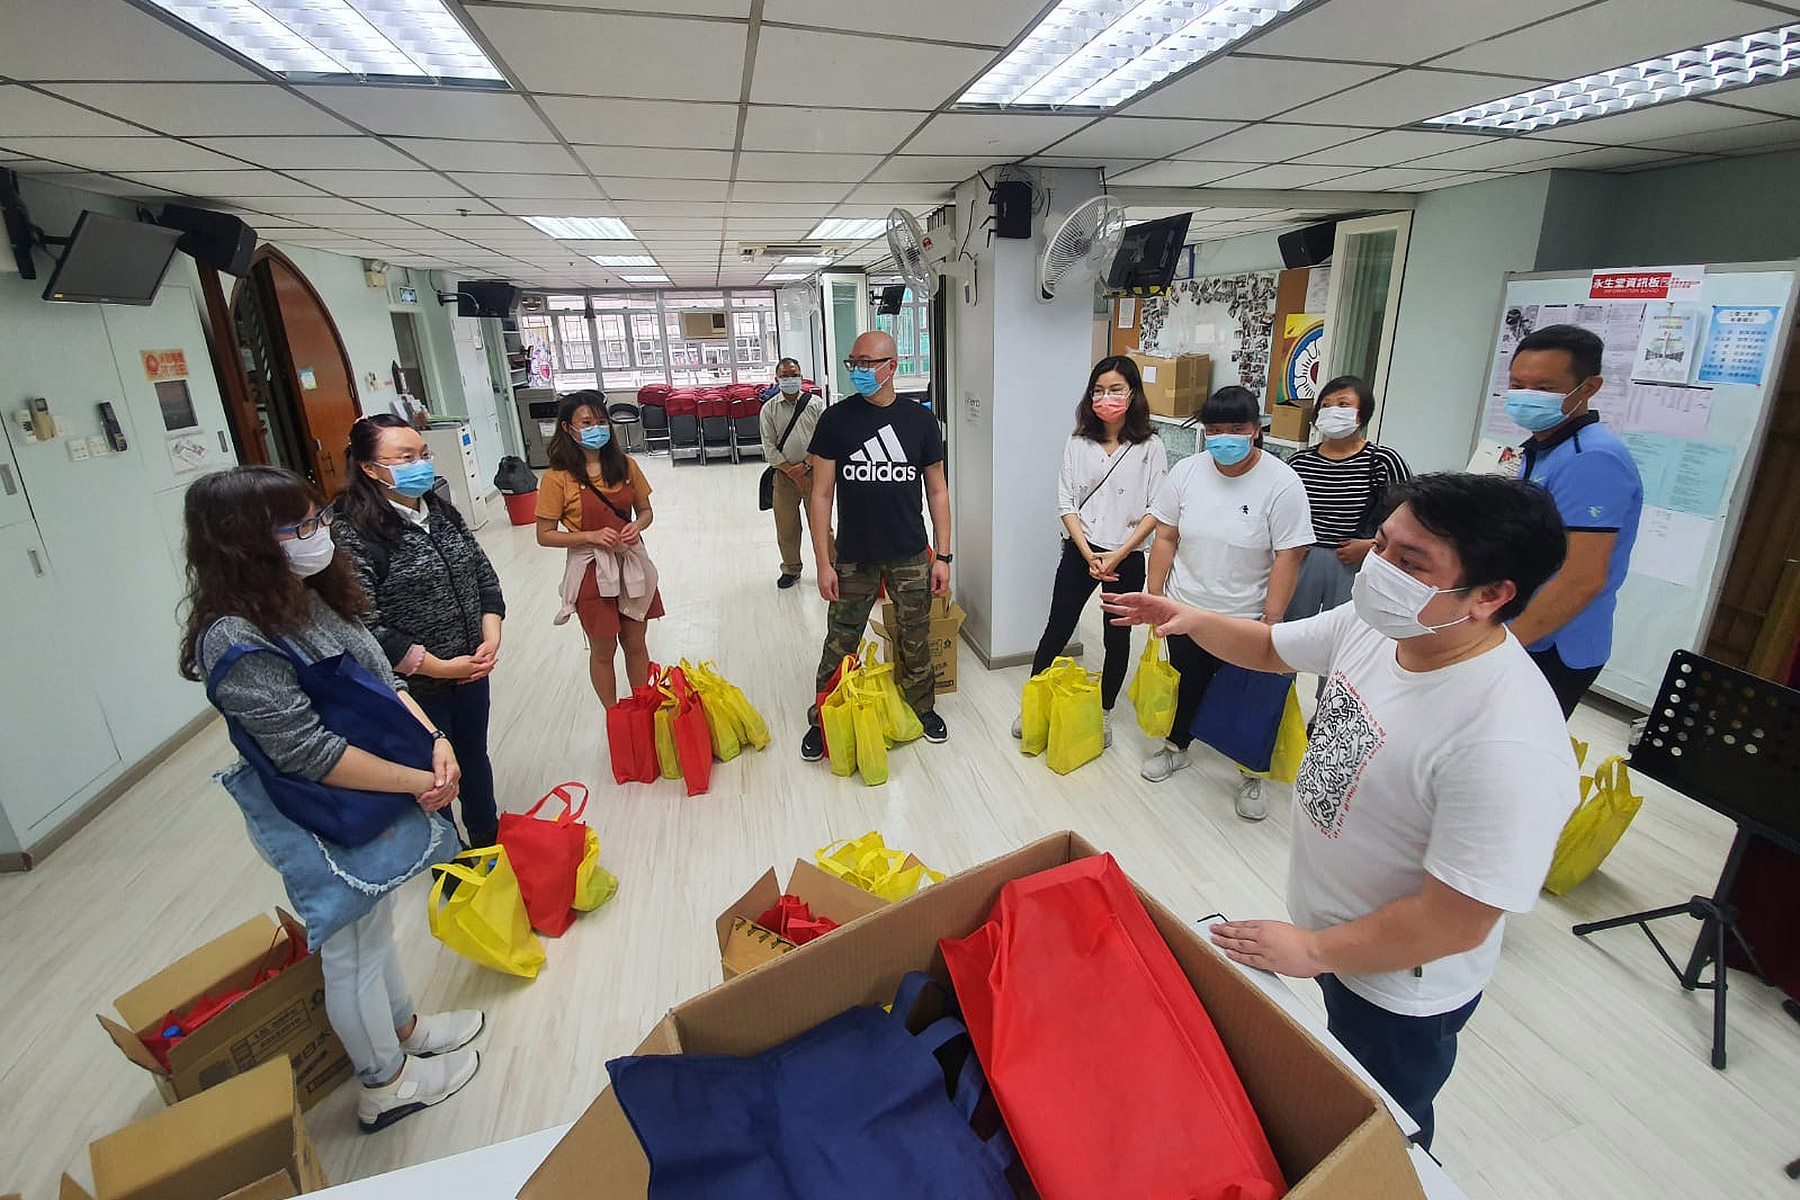 Volunteers at the Eternal Life Lutheran Church in Hong Kong prepare supplies to distribute to local people in need